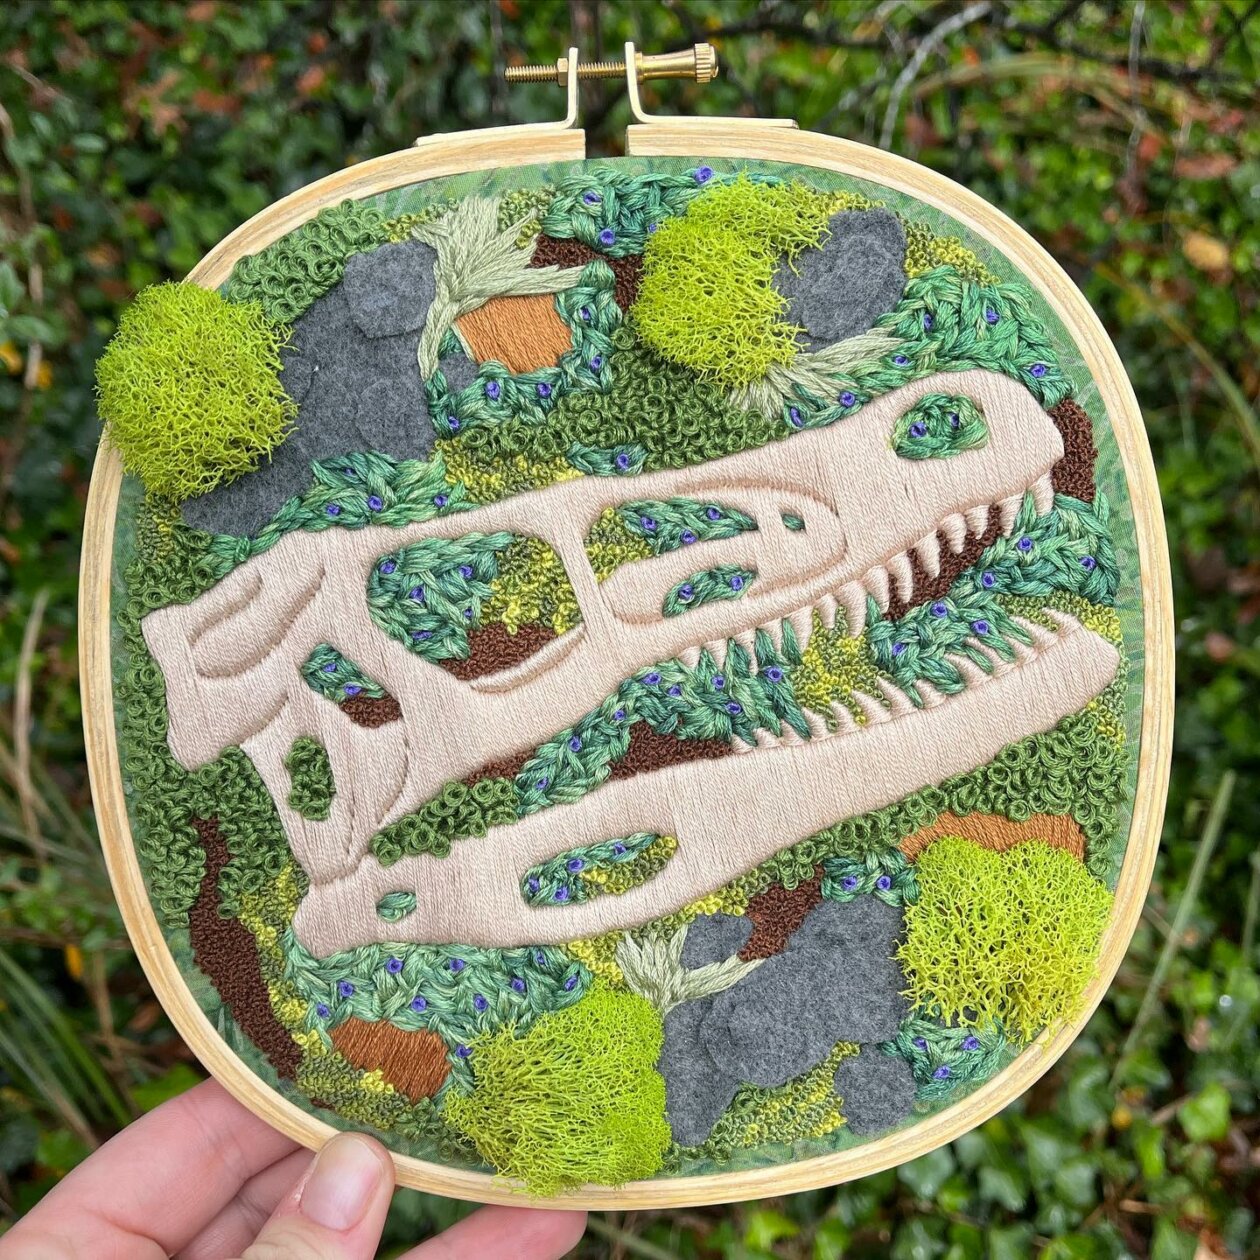 Embroidered Fossils, The Nature Inspired Embroidery Art Of Rachel Crisp (14)